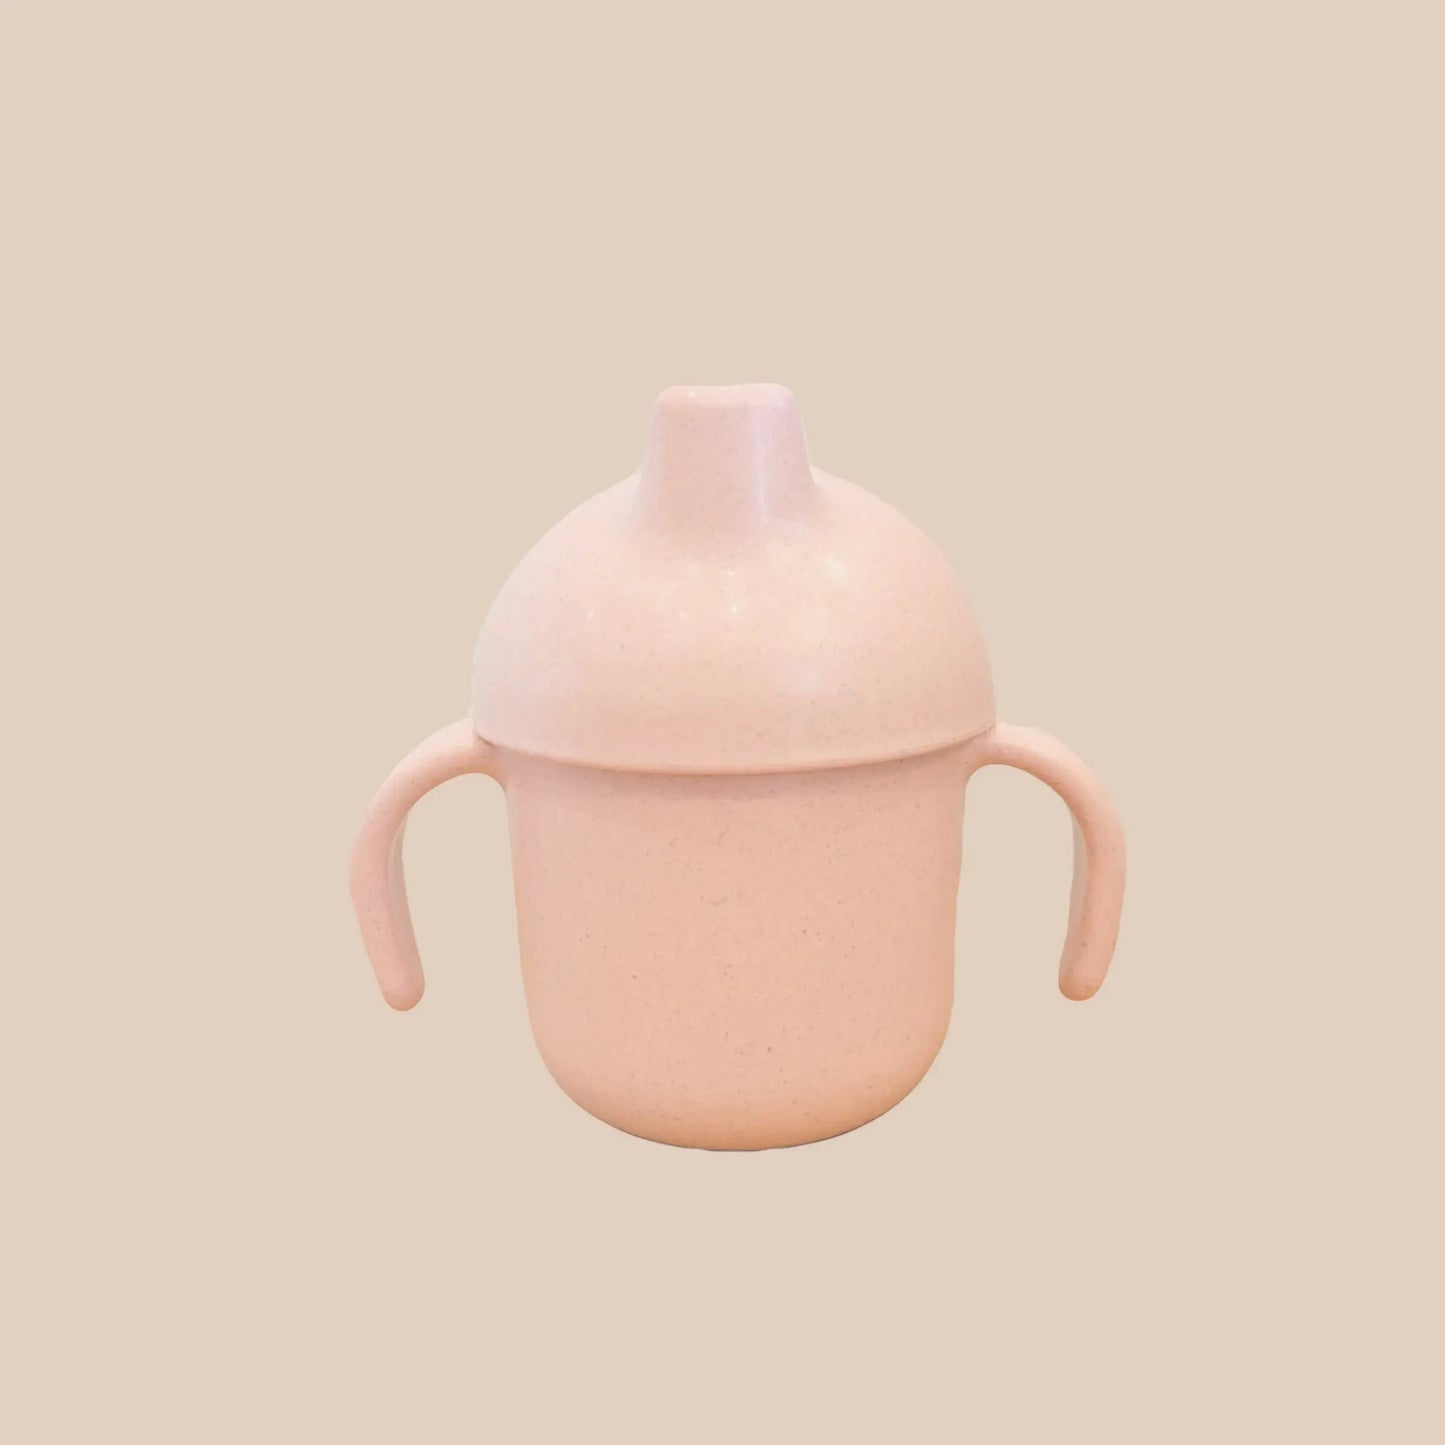 Minito & Co | Sippy Cup made of Wheat Straw, Pink